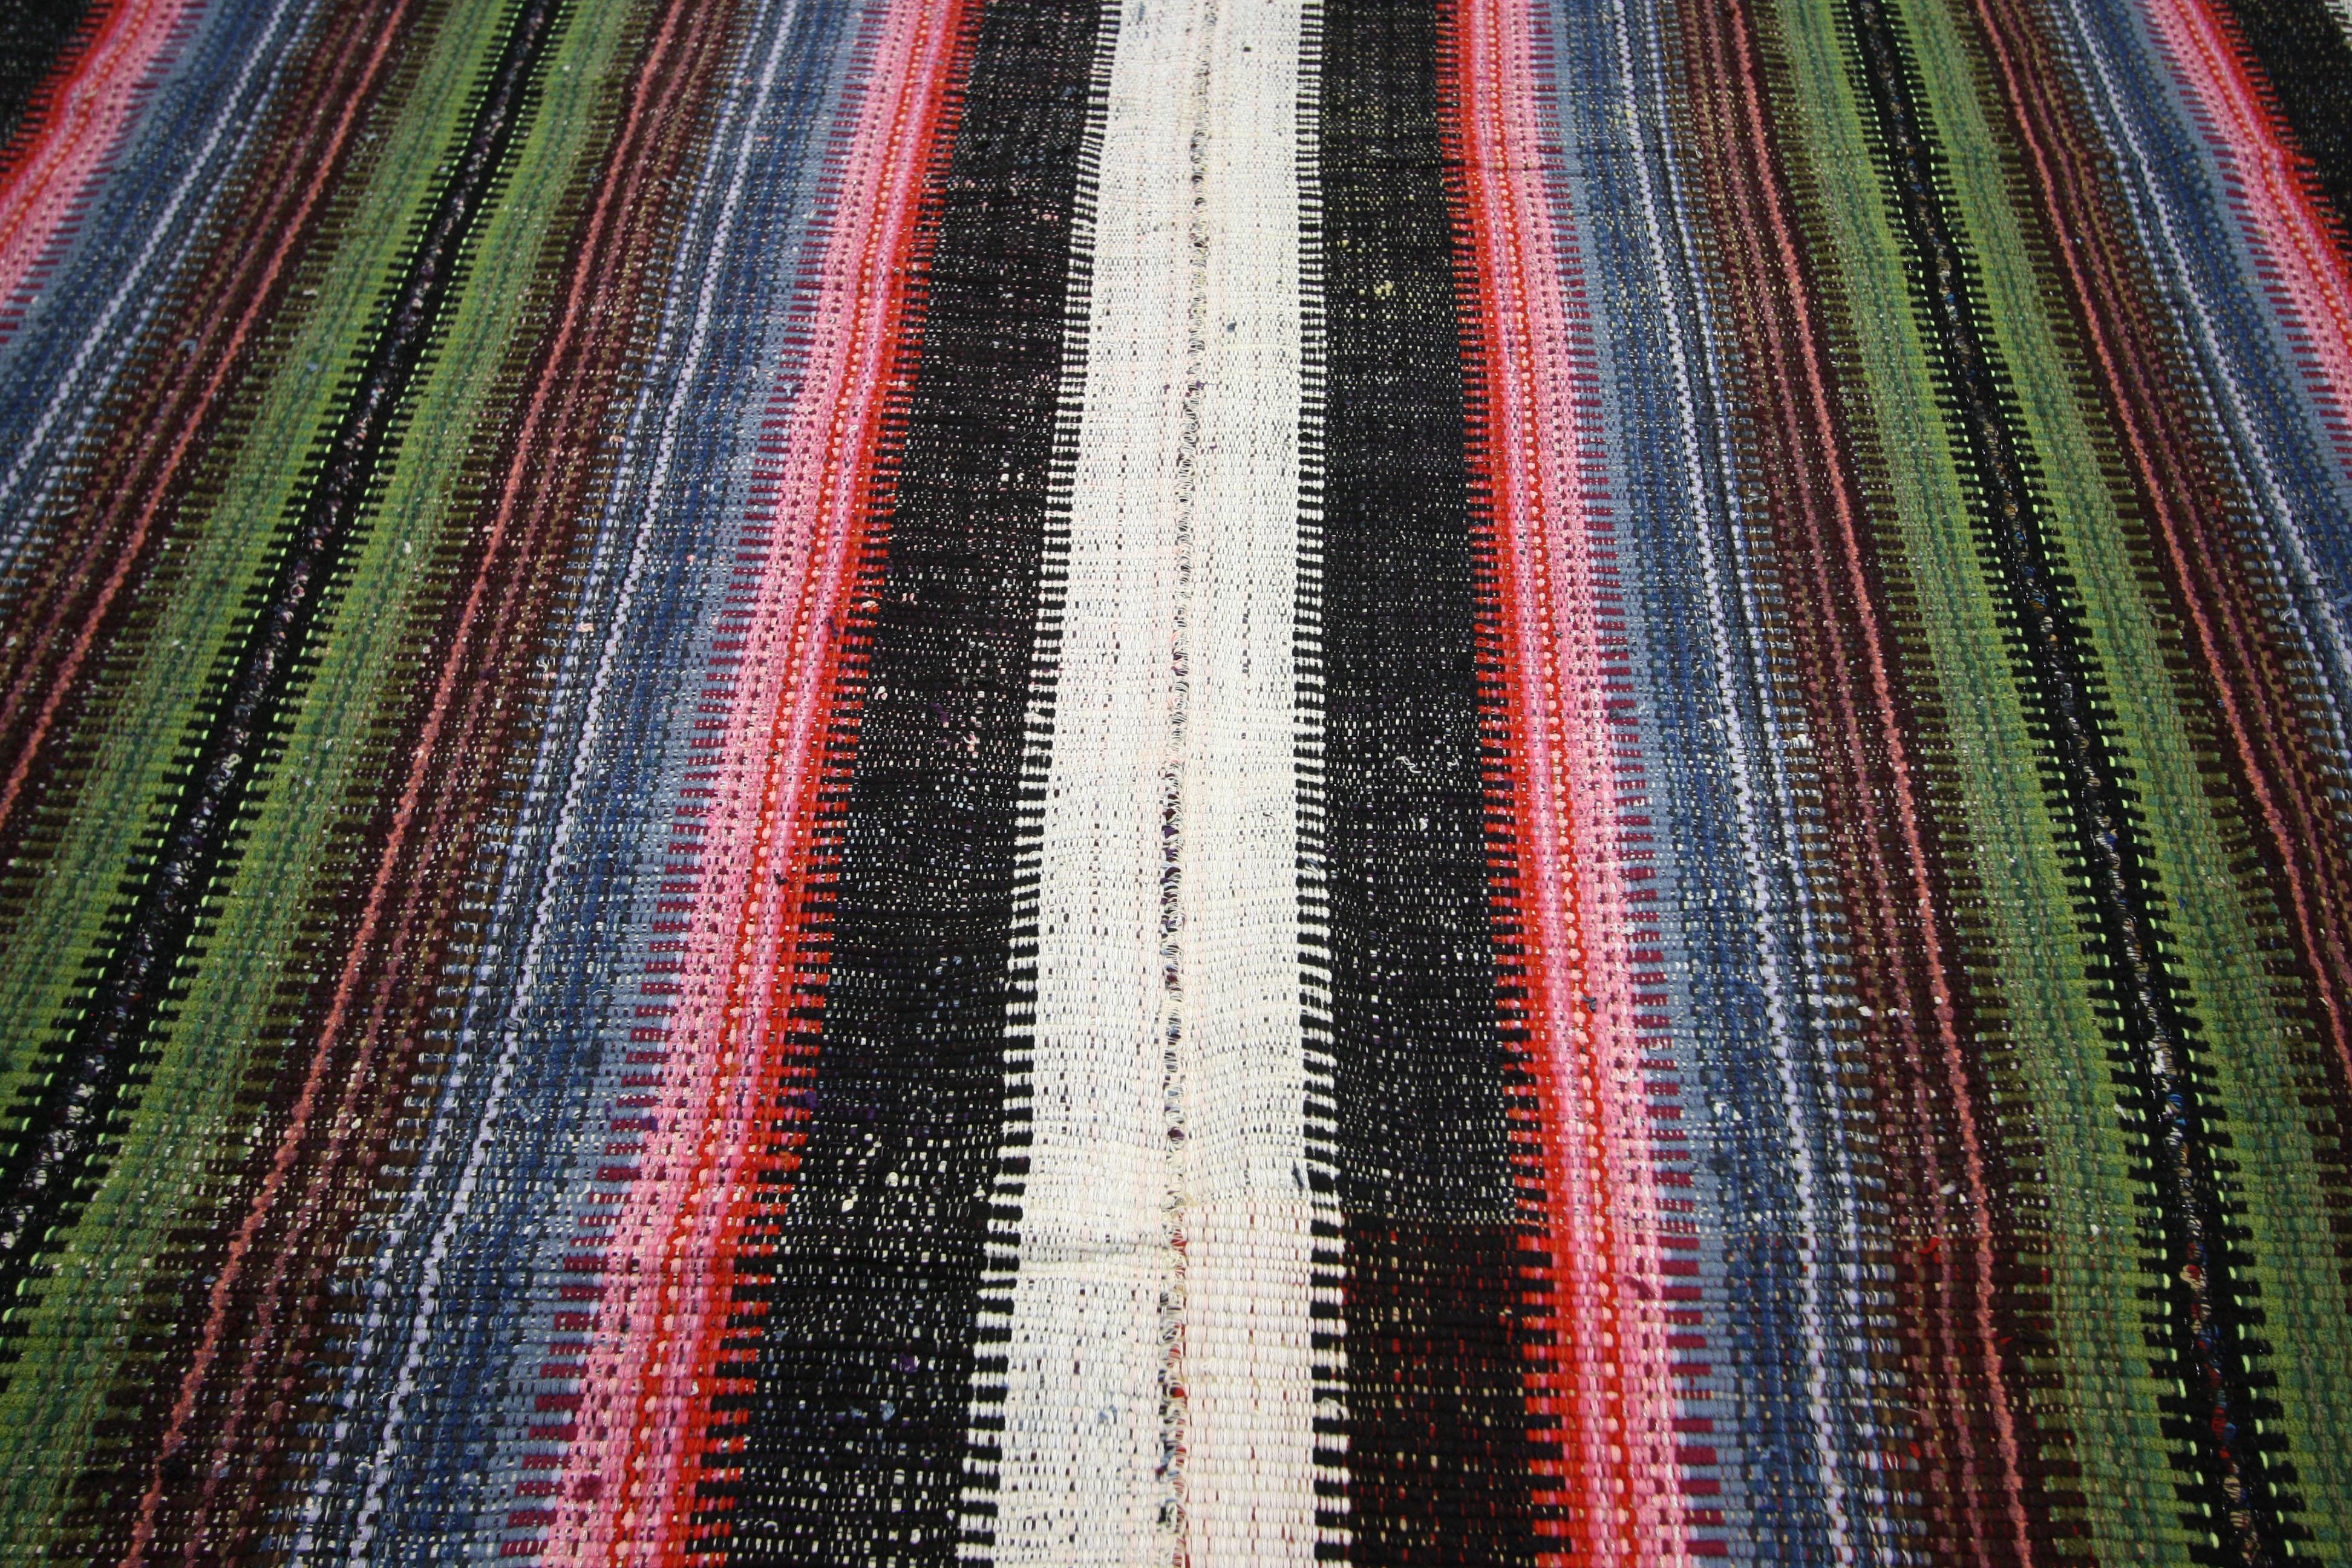 60680, Eclectic Modern Boho Vintage Turkish Jajim colorful Kilim rug with stripes. This handwoven wool vintage Turkish Kilim Jajim Kilim rug features a variety of colorful stripes composed of both wide and narrow bands forming a captivating visual